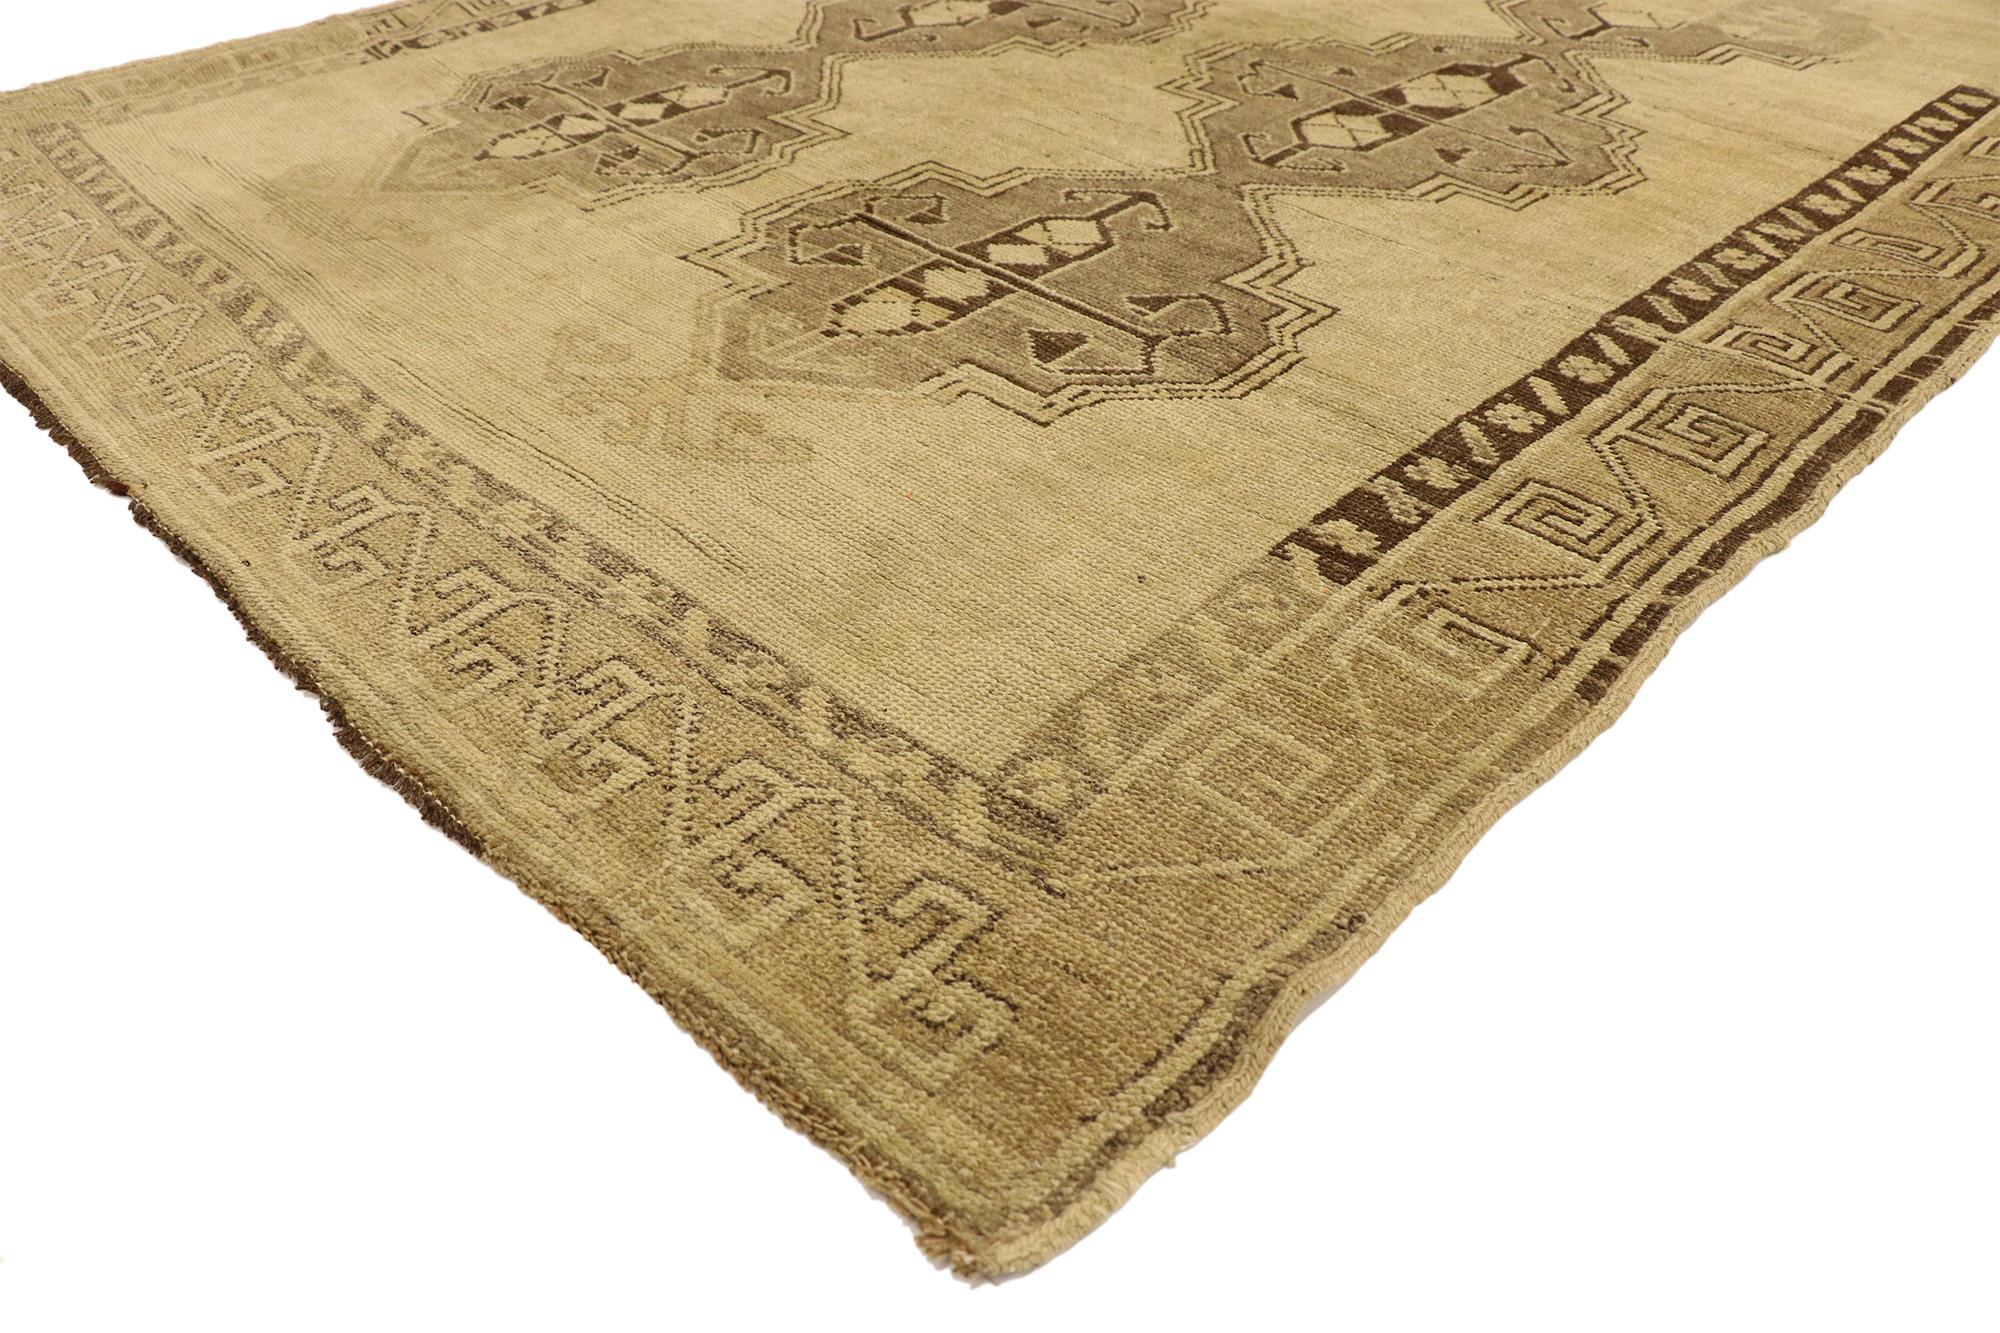 50743 Vintage Turkish Oushak Rug, 05'00 x 14'00. Turkish Oushak rugs, imbued with antique charm and adorned in subdued colors, undergo a meticulous washing process that safeguards their texture and pile integrity. Through this delicate treatment,